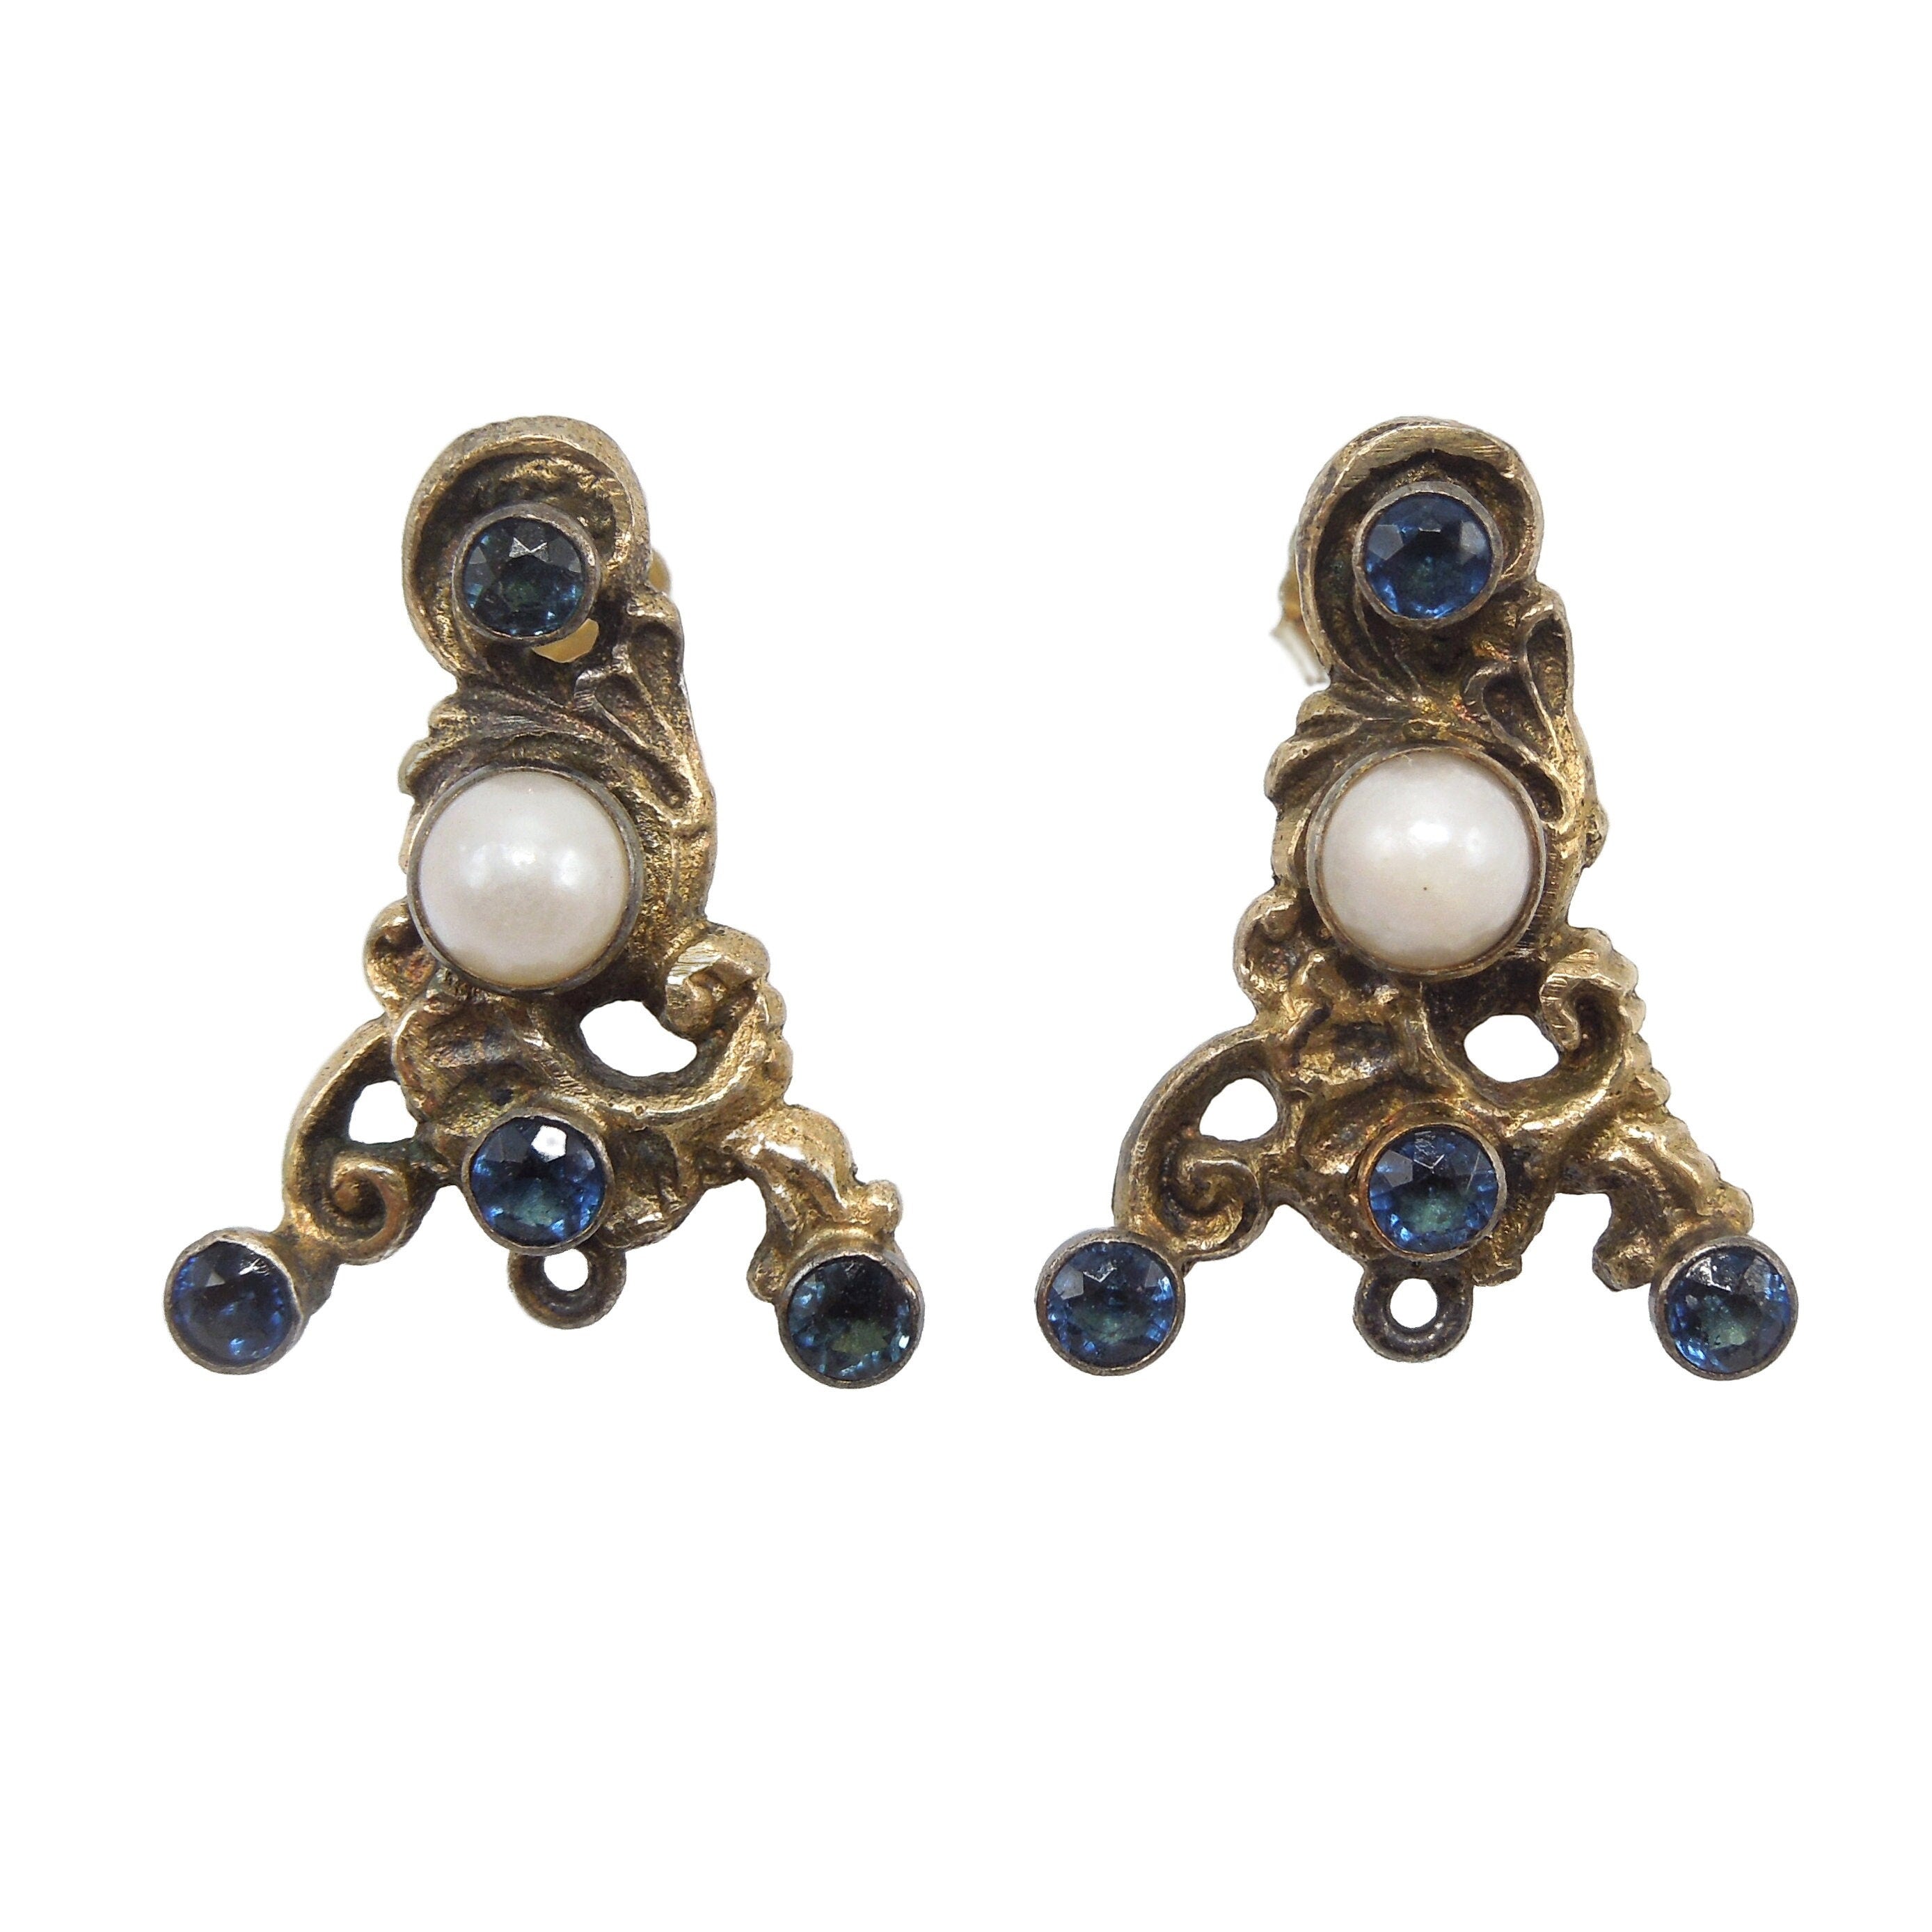 Antique Austro-Hungarian Vermeil Earrings with Sapphires and Pearls